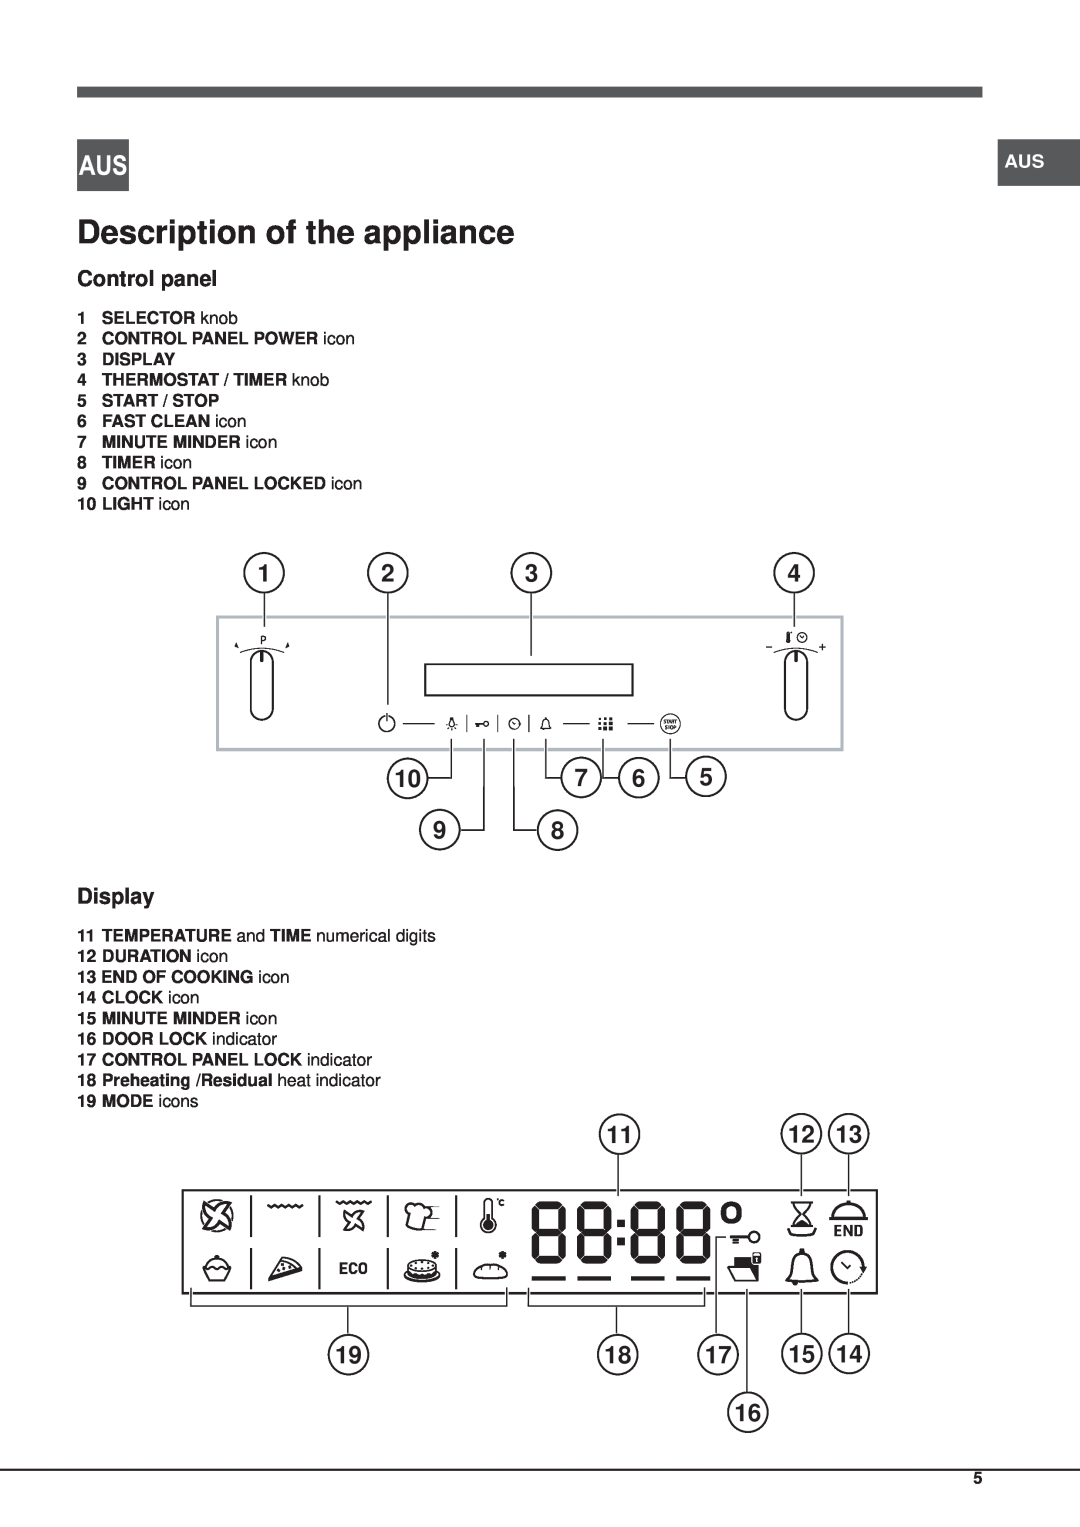 Ariston OK 892EL S P AUS, OK 892EL S P X AUS, OK 892EL P X AUS S manual Description of the appliance, Control panel, Display 